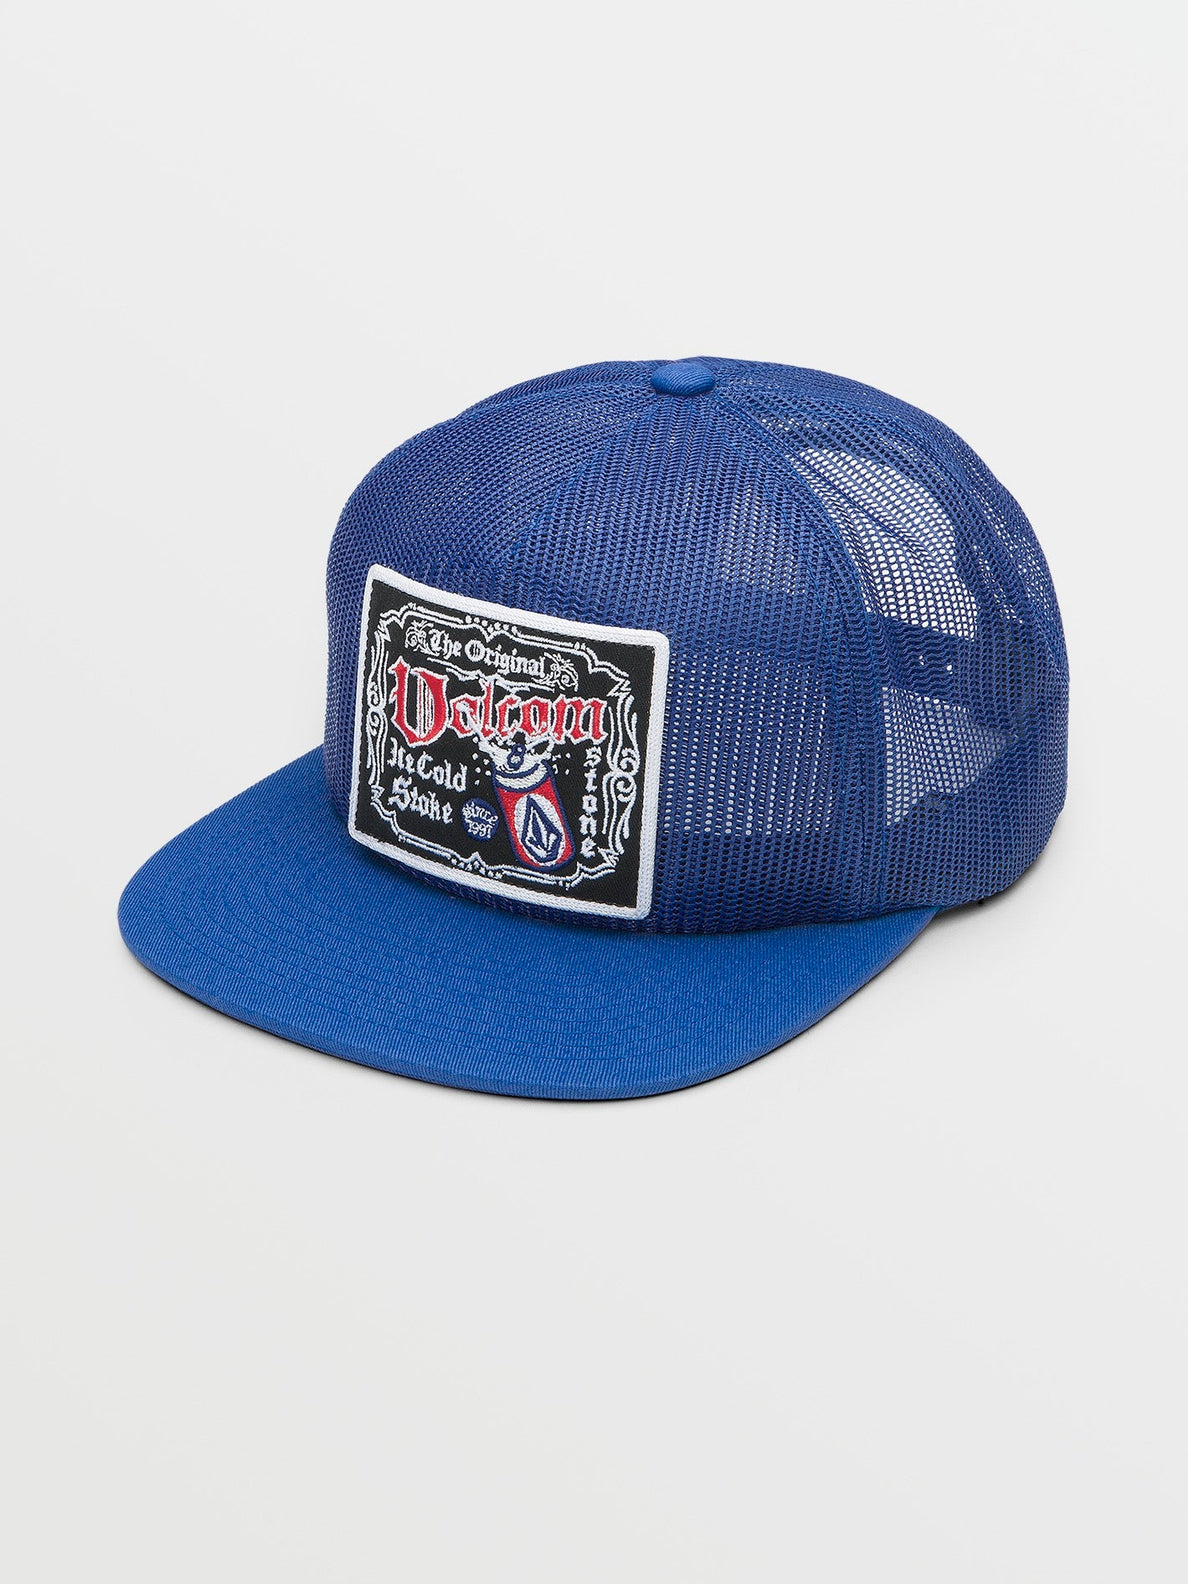 Ice Cold Cheese Hat - Patriot Blue